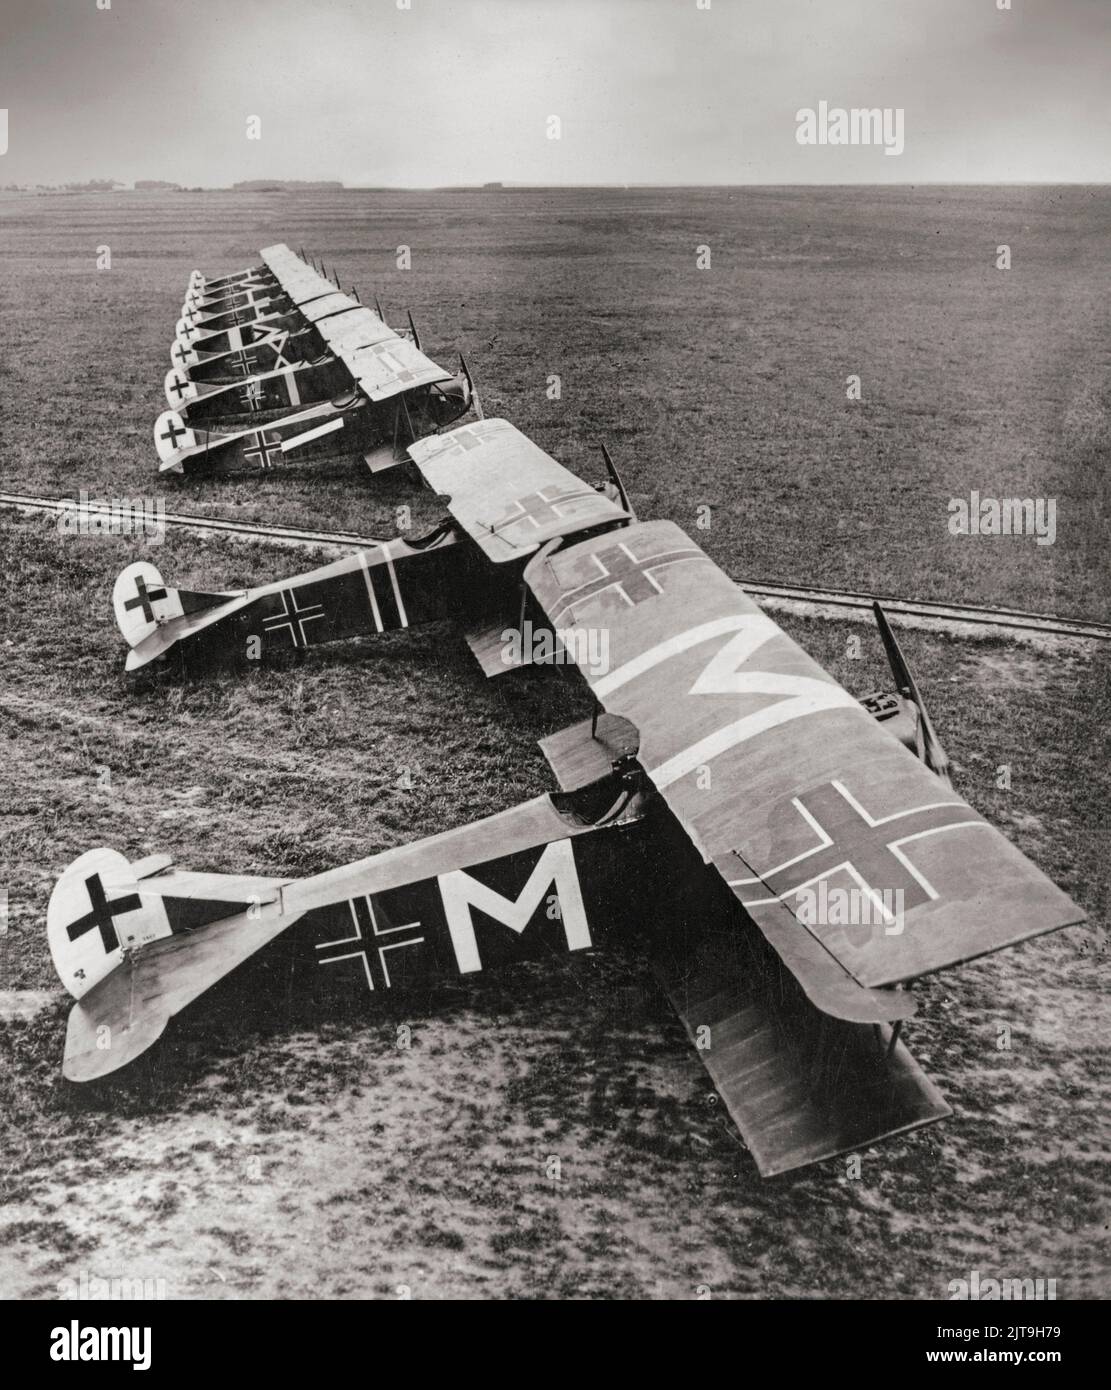 Ten German Fokker D.VII aircraft of Jasta 72 at Bergnicourt, France, in July 1918. The Fokker D.VII was a German World War I fighter aircraft quickly proved itself to be a formidable aircraft while serving with the Imperial German Army Air Service (Luftstreitkräfte) during World War I. The D.VII was also noted for its high manoeuvrability and ability to climb, its remarkably docile stall and reluctance to spin. Stock Photo